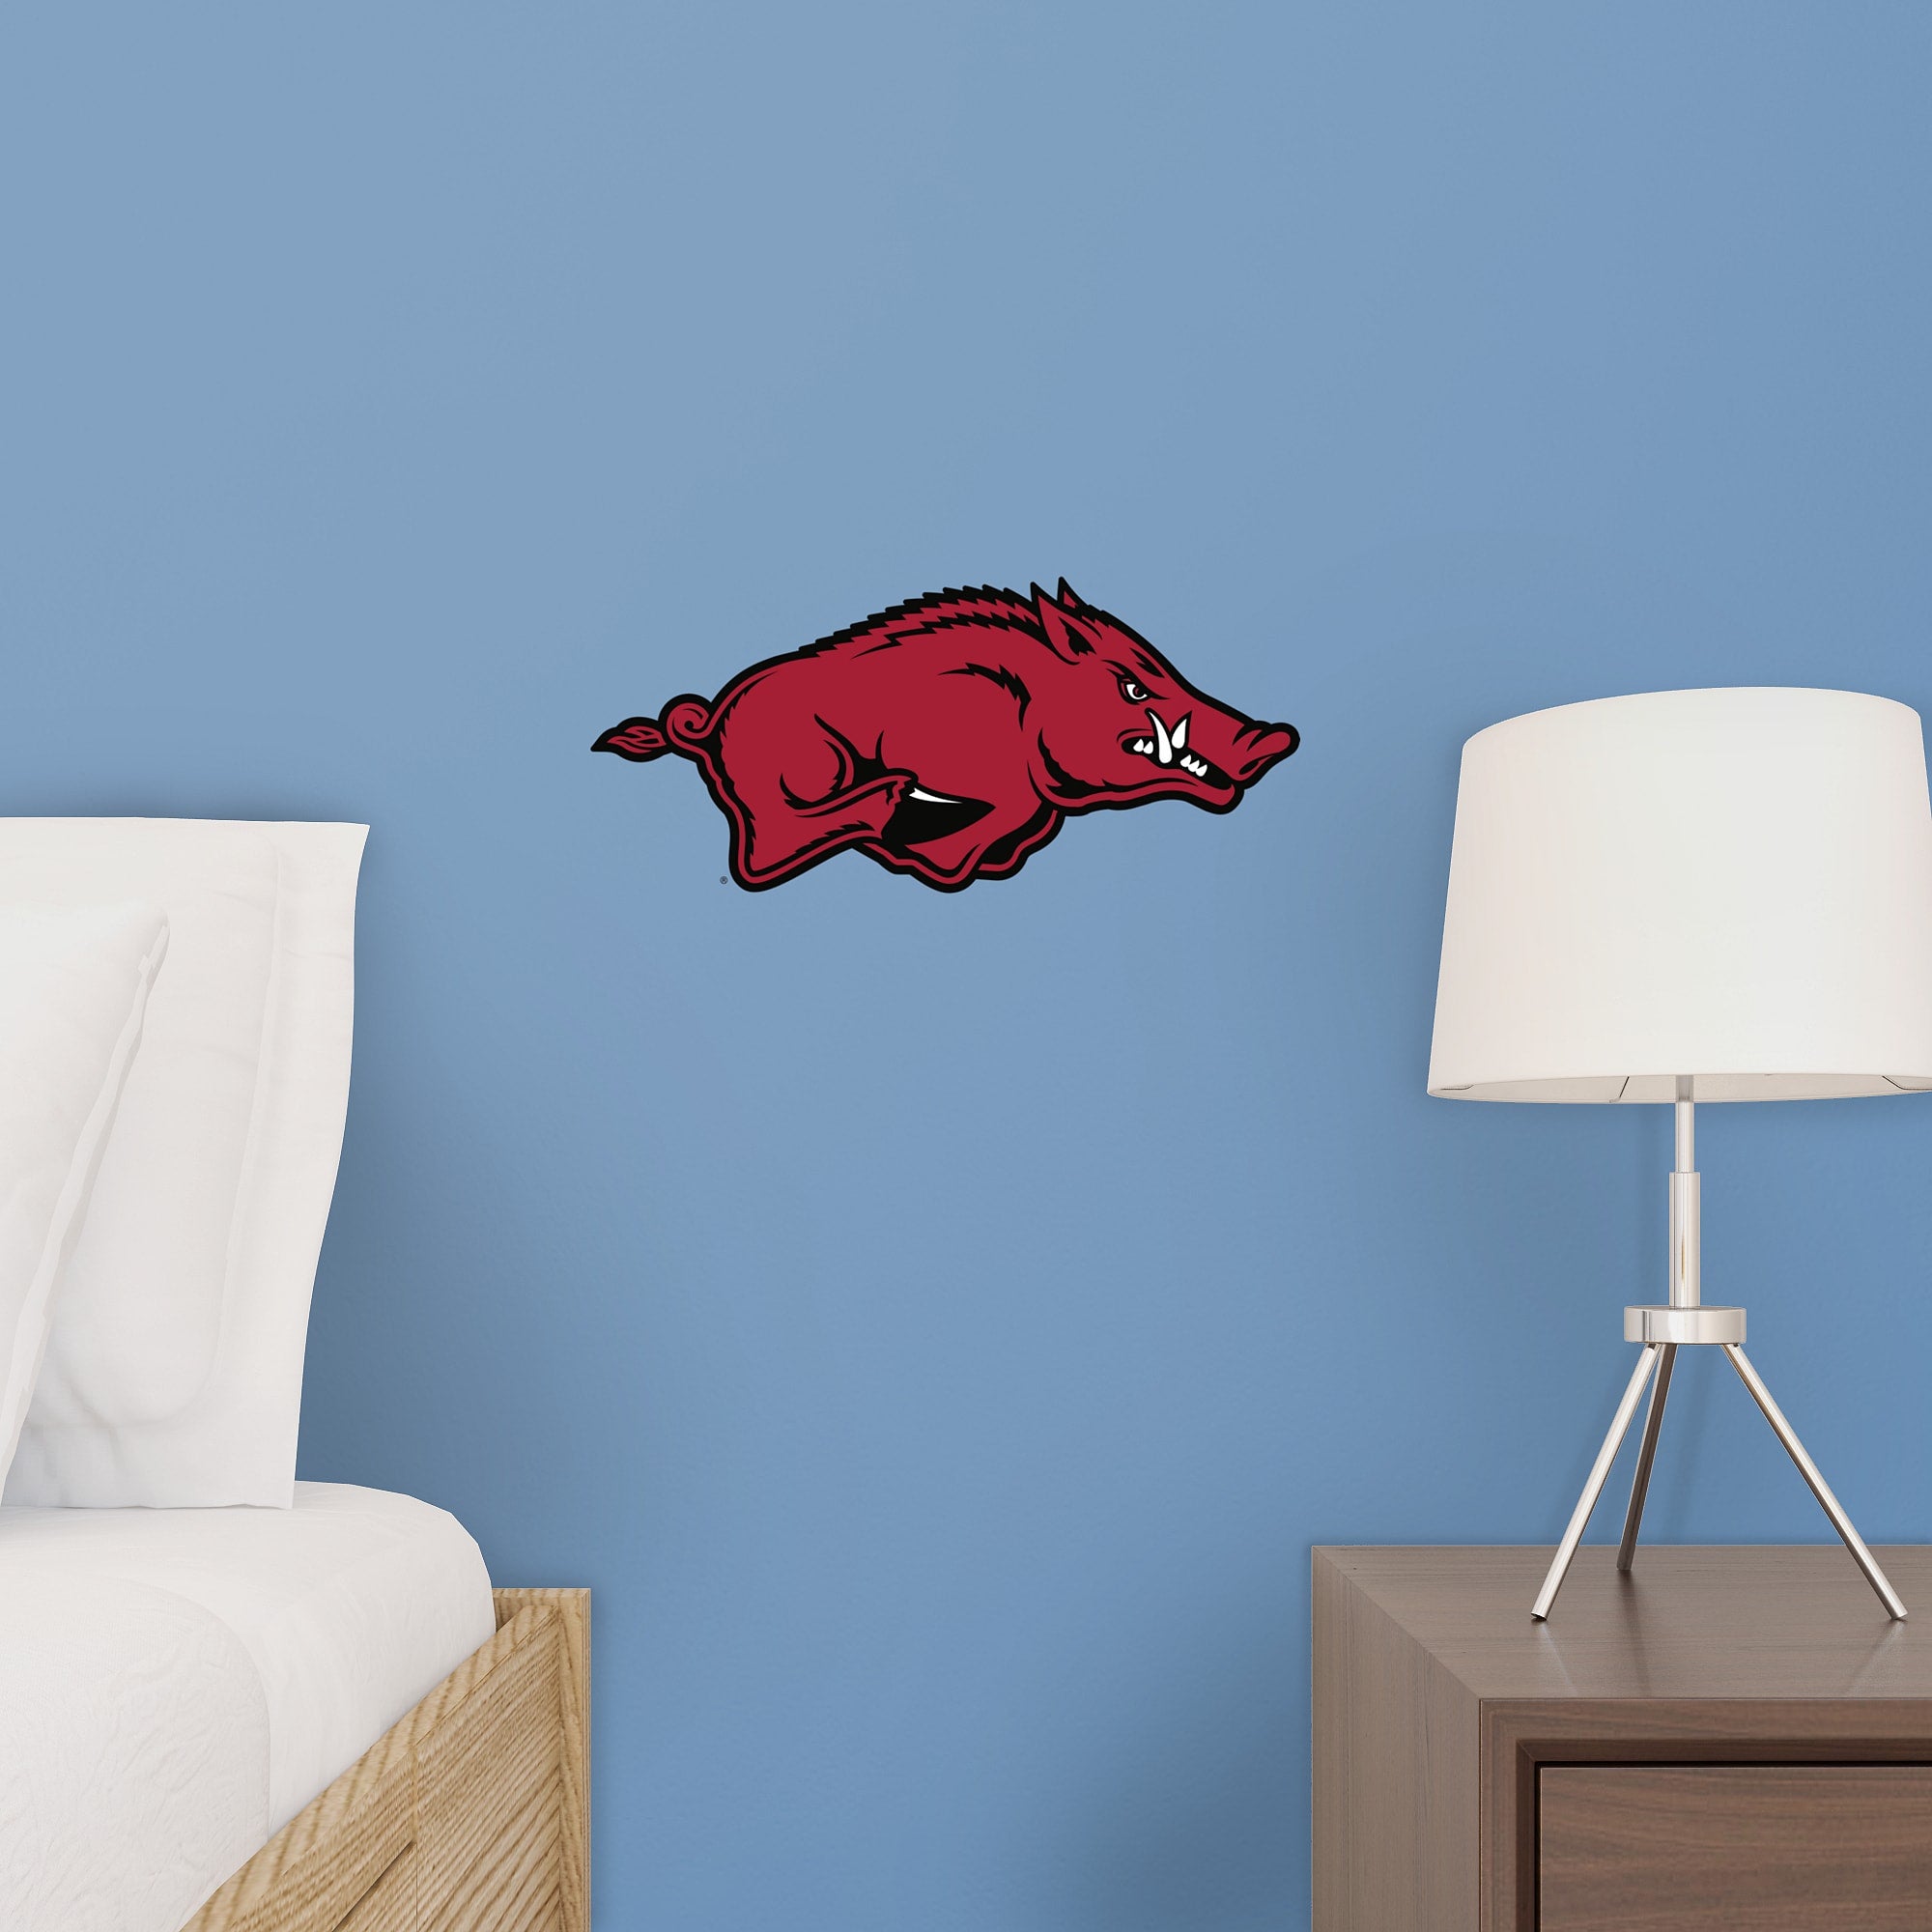 Arkansas Razorbacks: Logo - Officially Licensed Removable Wall Decal 16.0"W x 7.0"H by Fathead | Vinyl